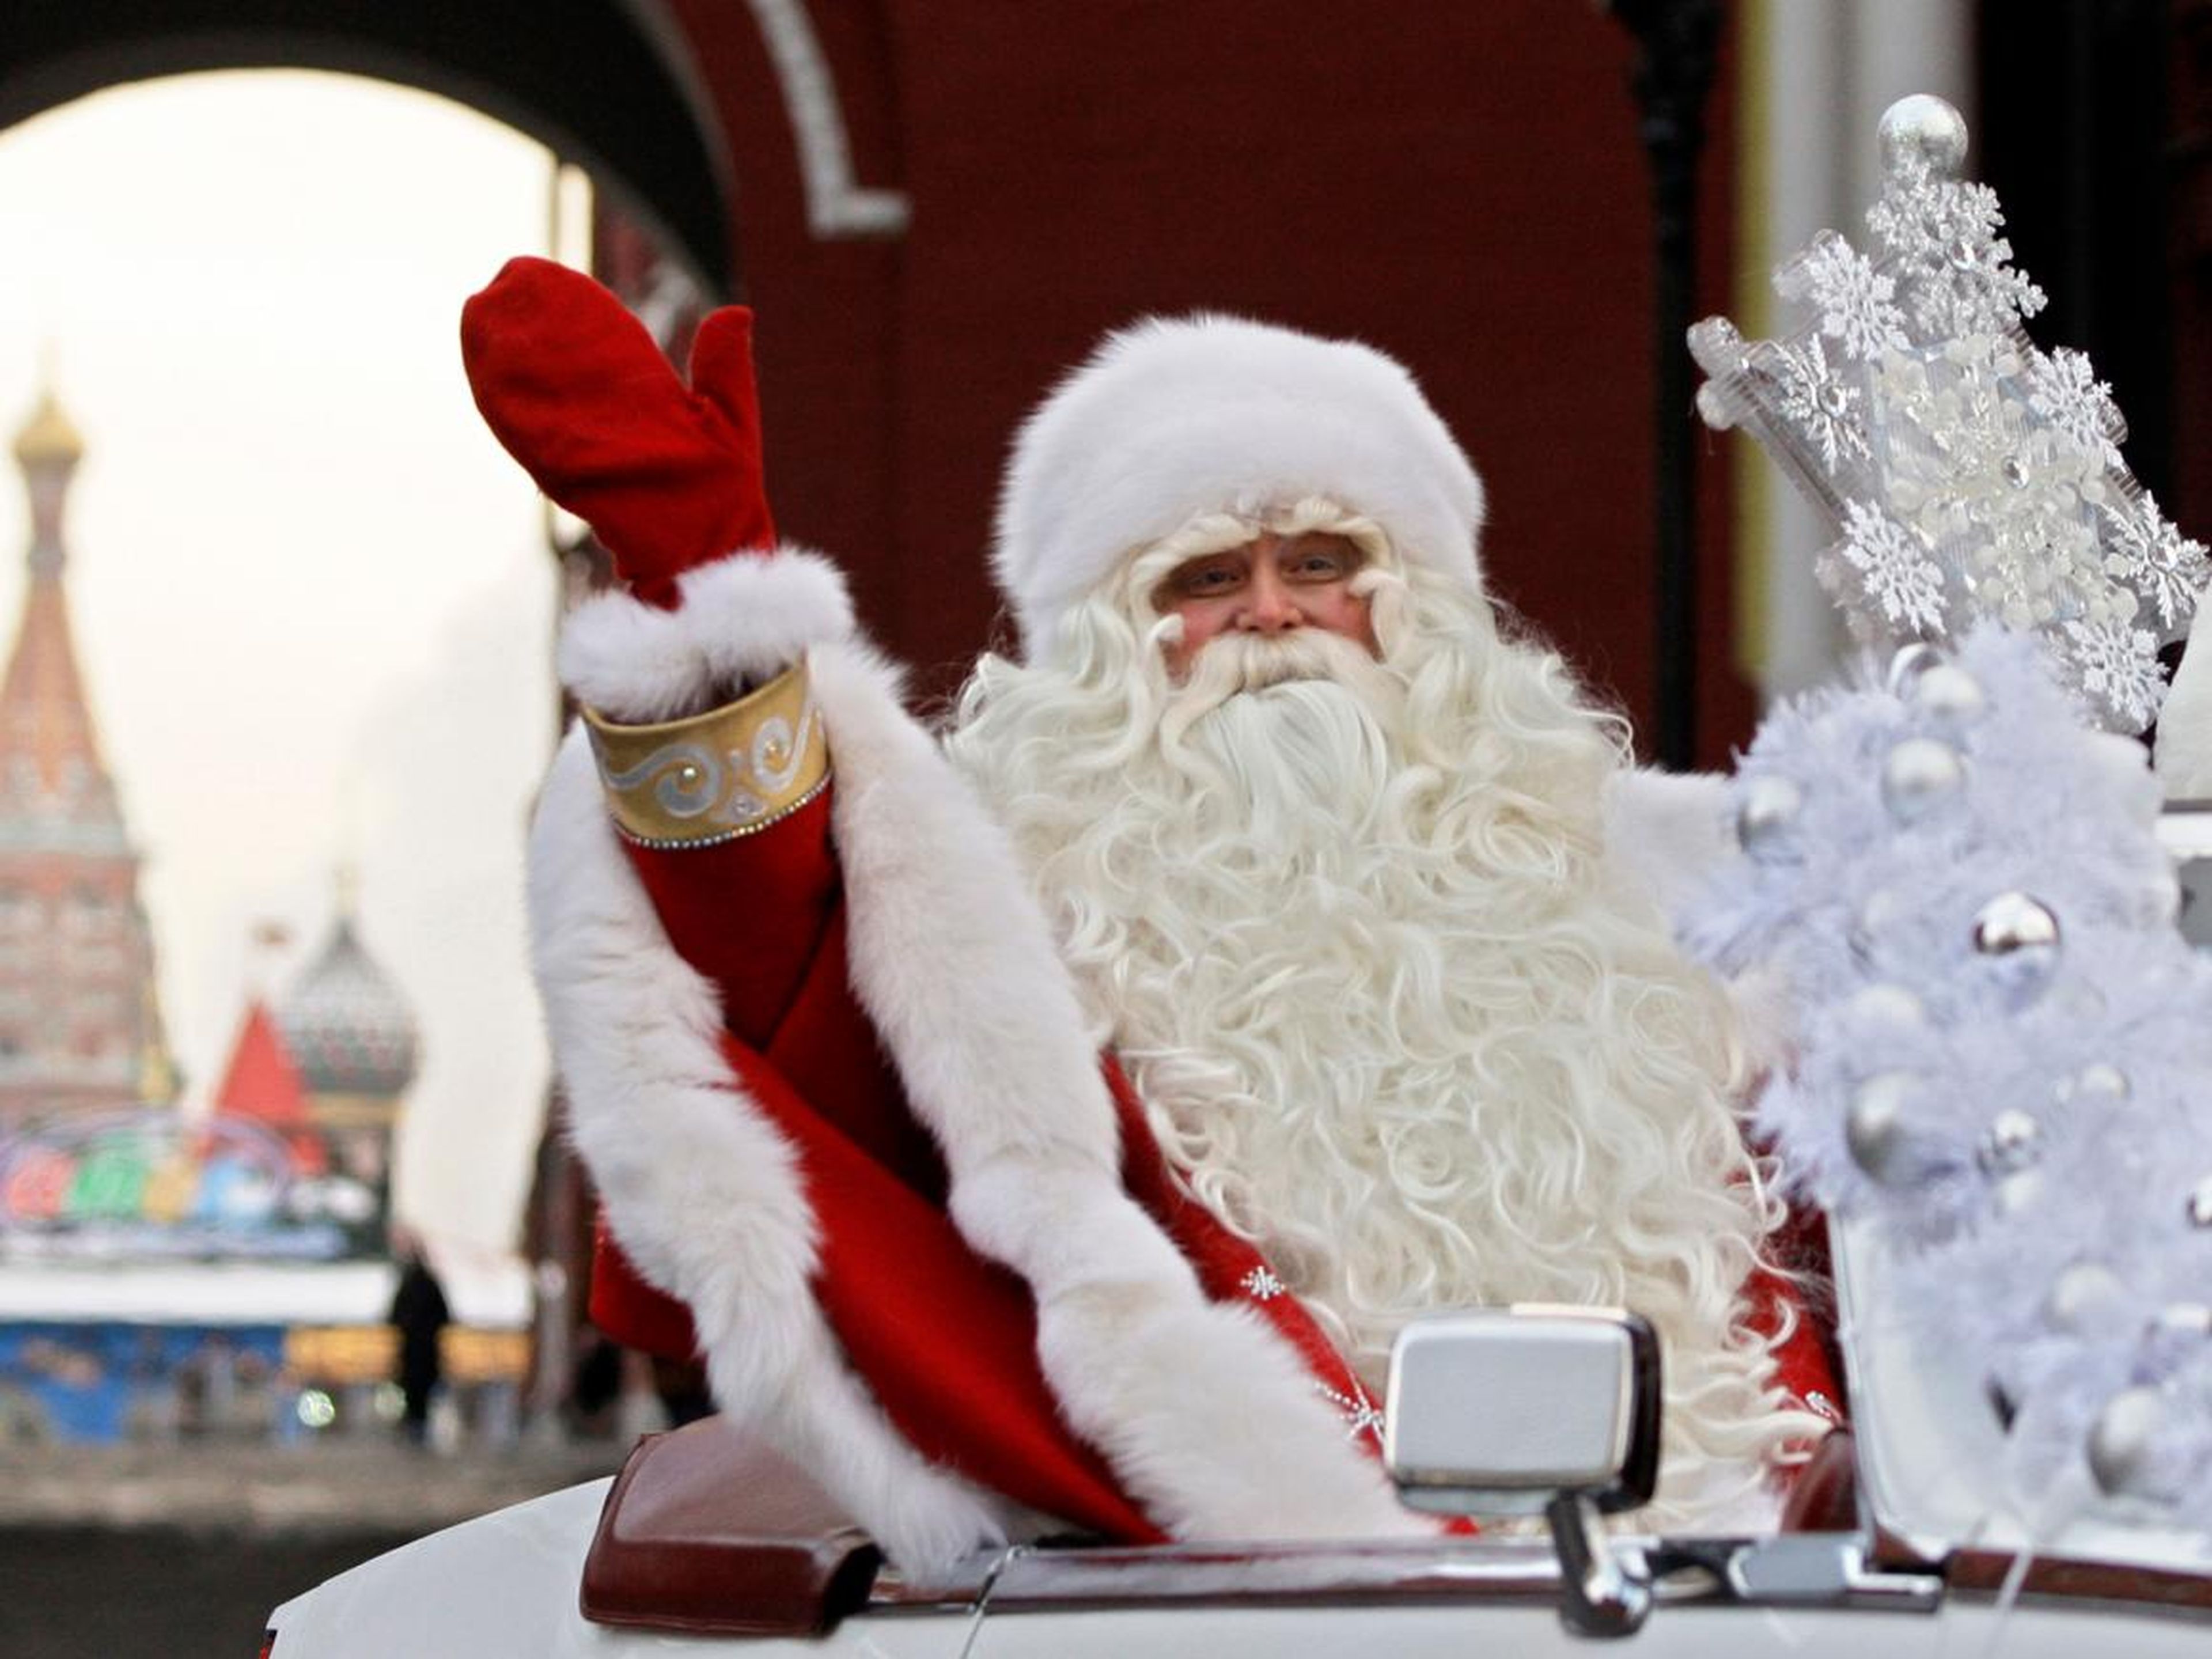 In this Friday, Dec. 26, 2008 file photo, Father Frost, the Russian equivalent to Santa Claus, waves during a welcome ceremony near Red Square